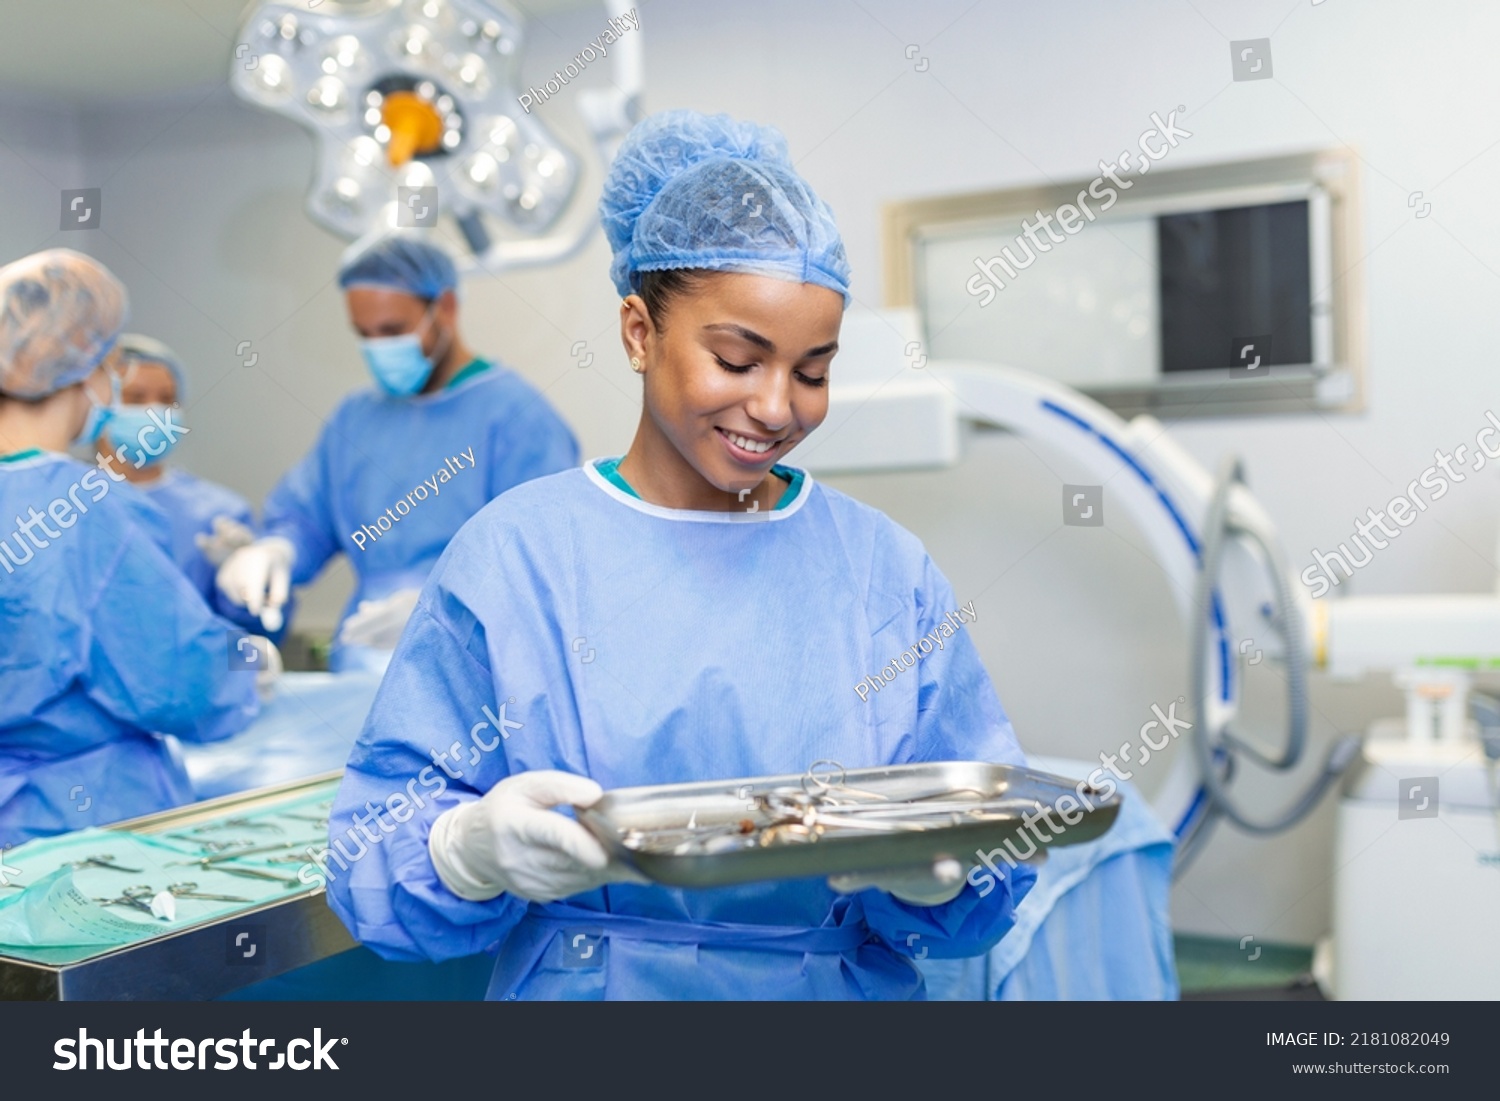 Portrait of female woman nurse surgeon OR staff member dressed in surgical scrubs gown mask and hair net in hospital operating room theater making eye contact smiling pleased happy looking at camera #2181082049